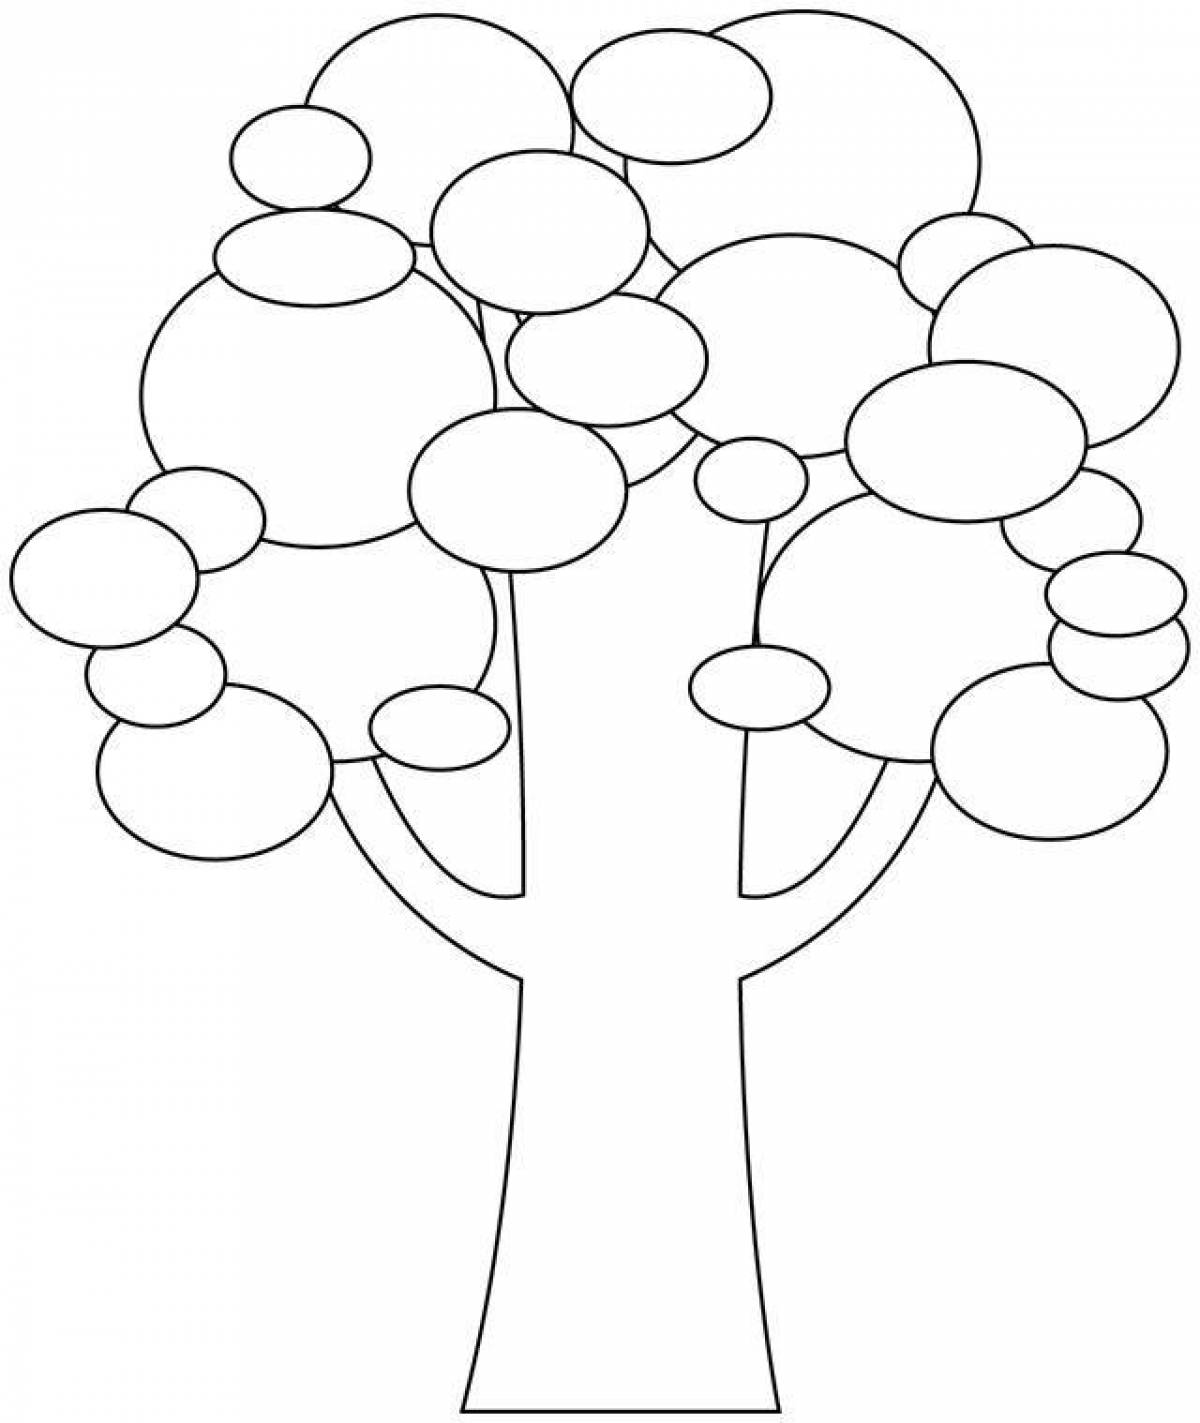 Creative pattern tree coloring page